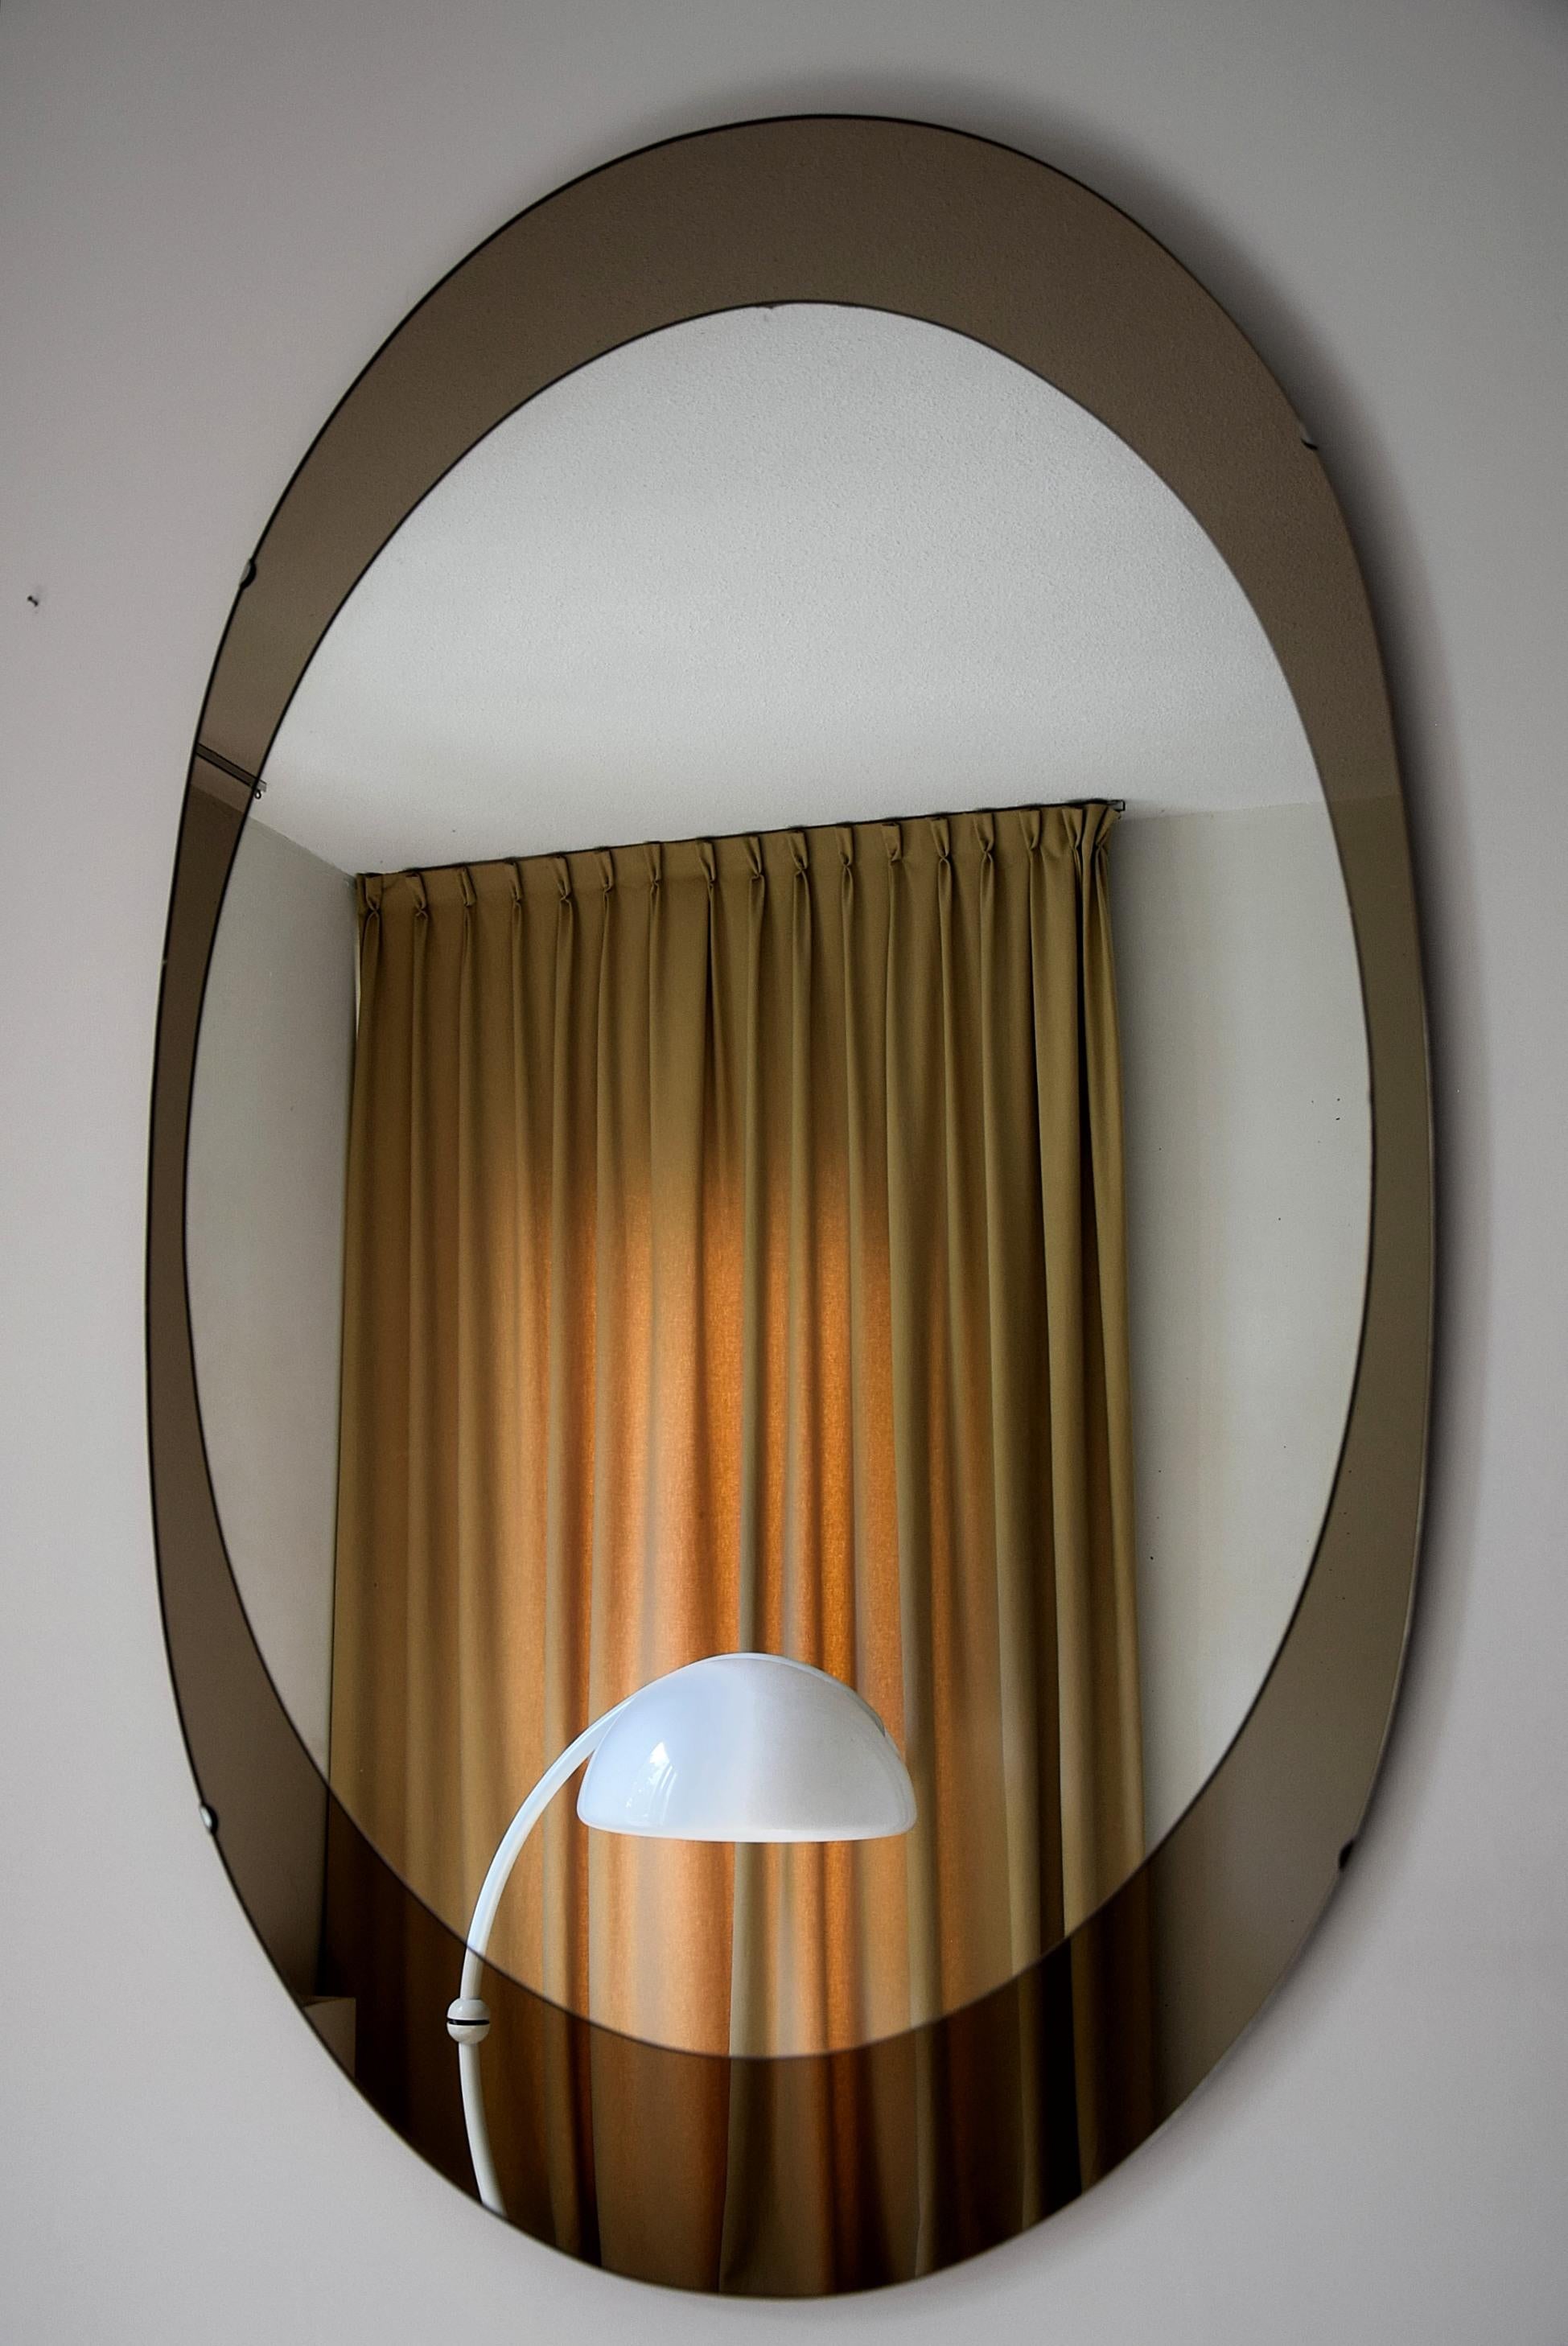 Impressive and stylish oval mirror with stylish bronze mirrored frame produced by Cristal Arte, Italy in the 1960s.
This beauty measures 132 cm or 4.4 feet x 80 cm or 2.8 feet. It can be hung either vertical or horizontal as can be seen in the